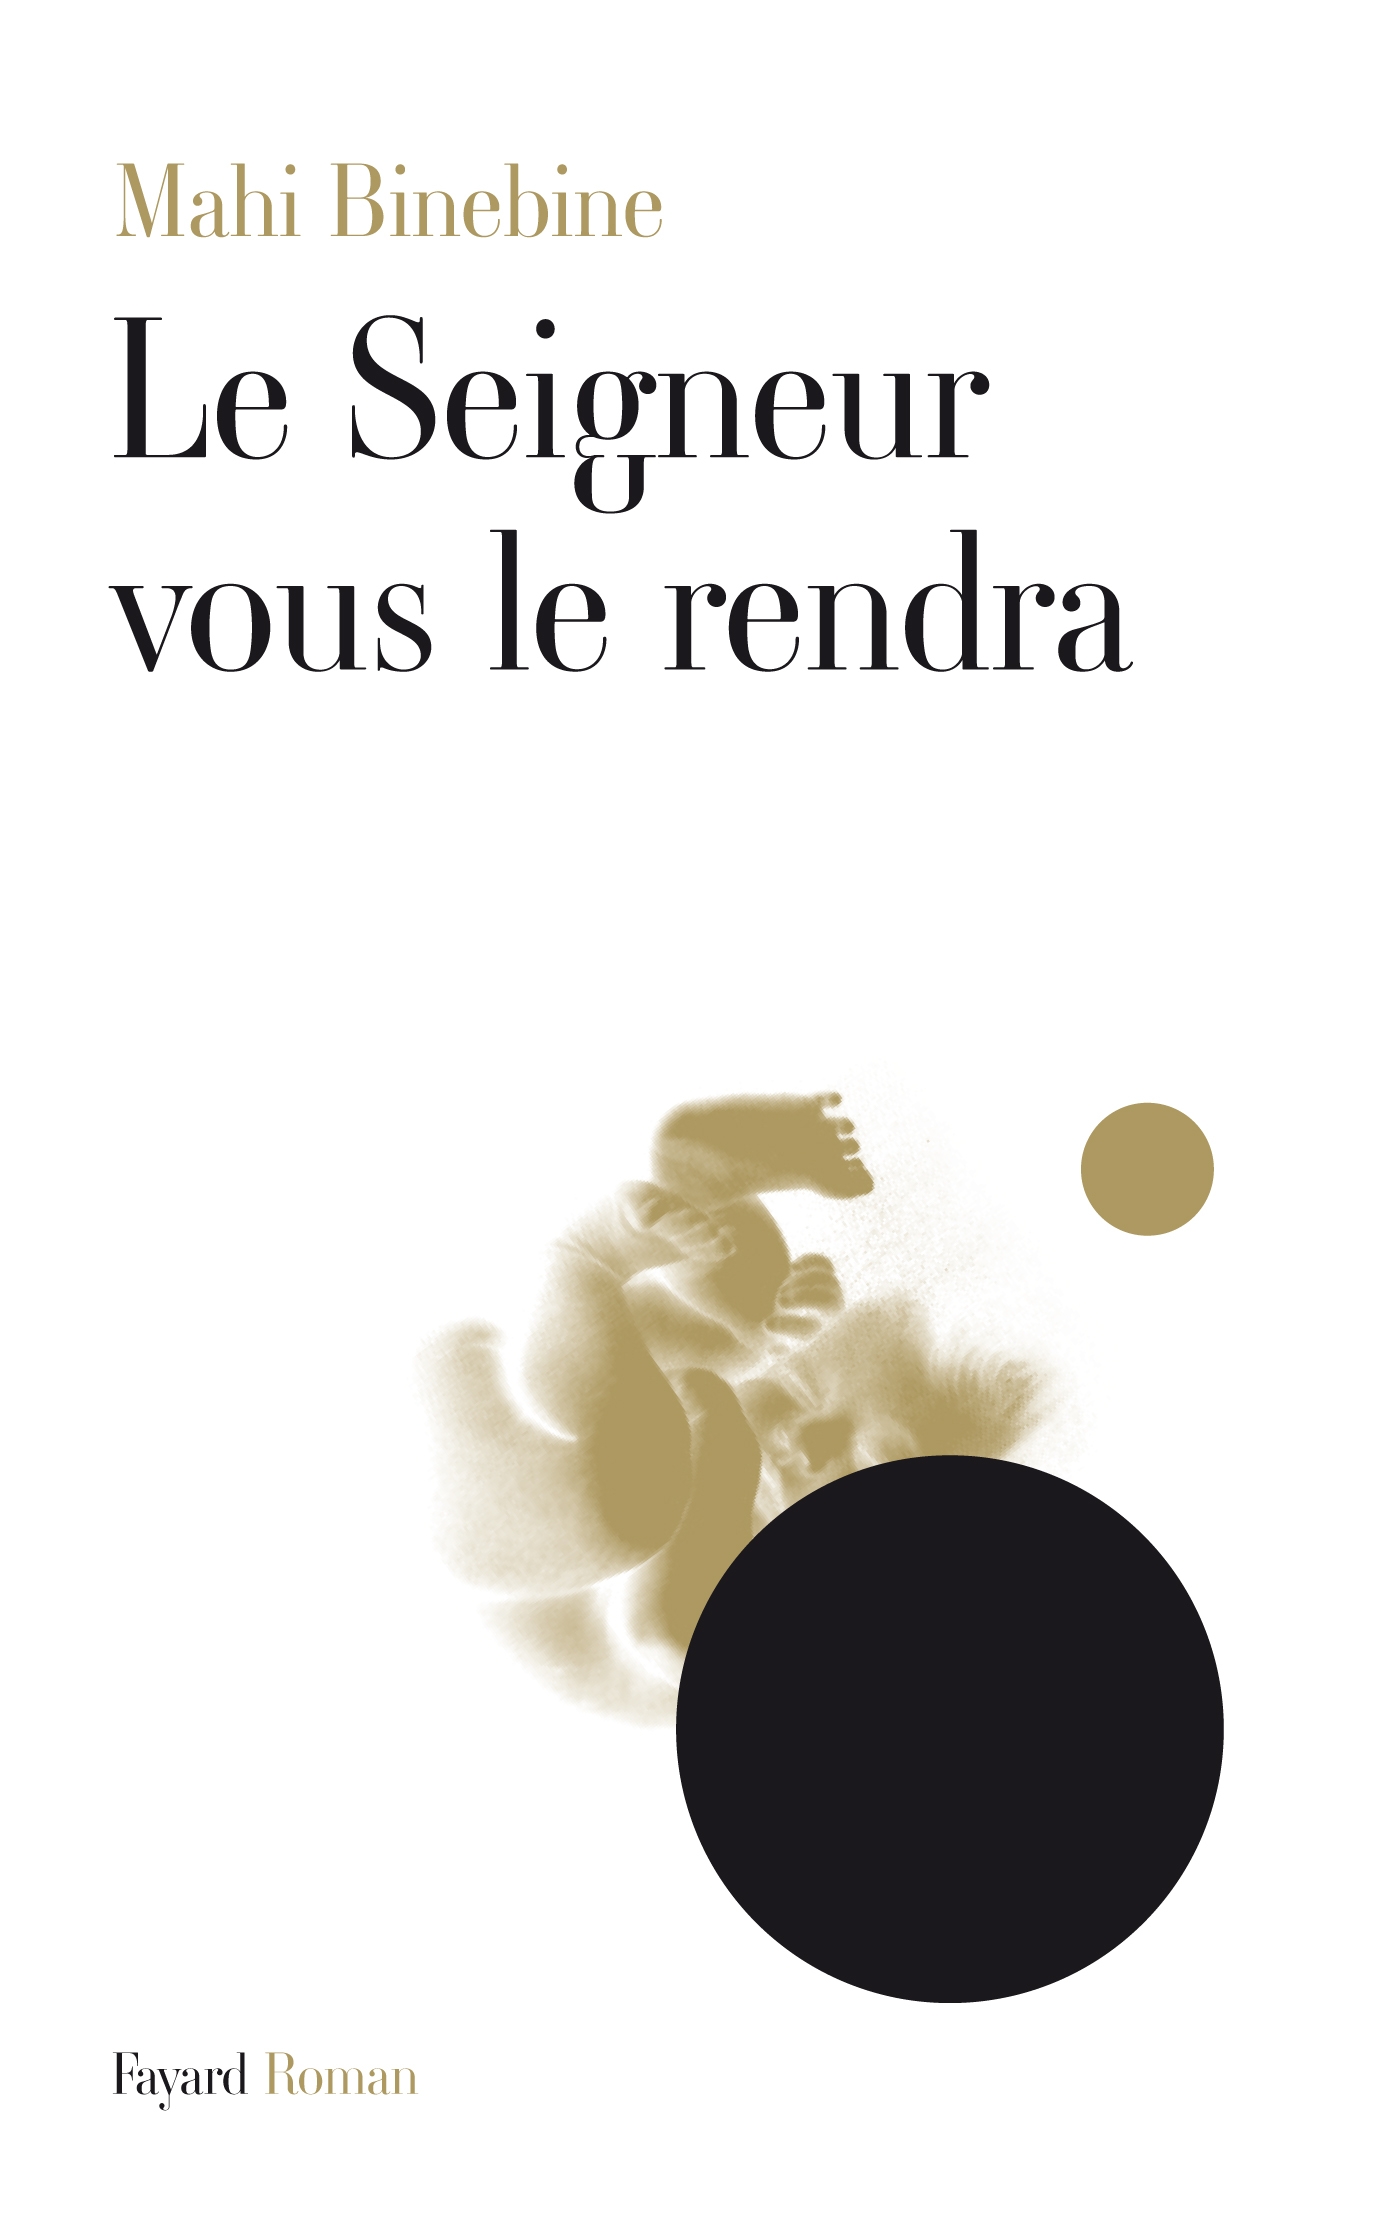 Mahi Binebine′s ″Le Seigneur vous le rendra″ (published in French by Fayard)